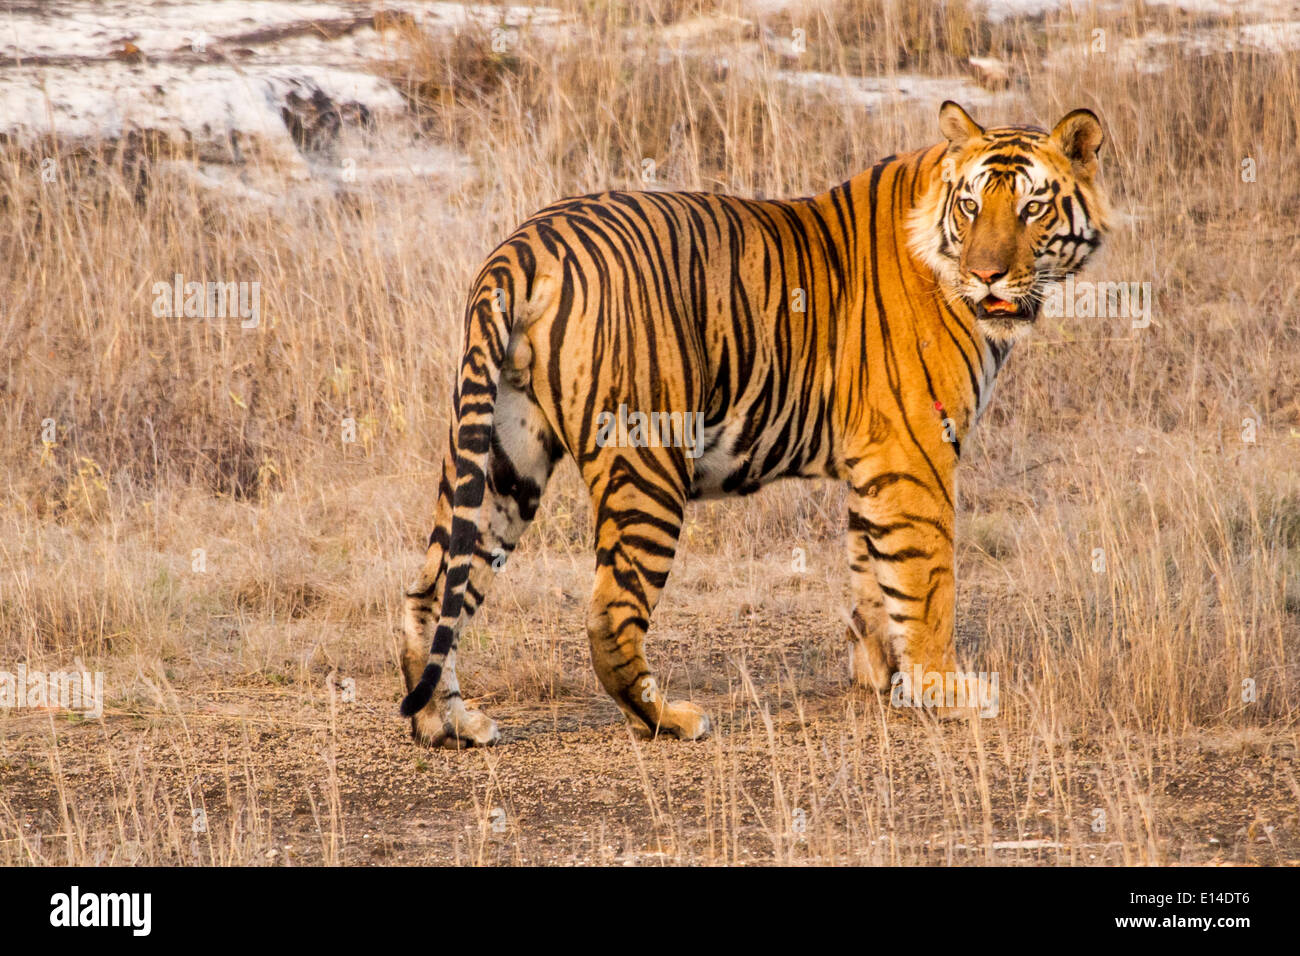 Male tiger hunting, side view and looking back in the afternoon light, Bandhavgarh tiger reserve, India, Asia Stock Photo